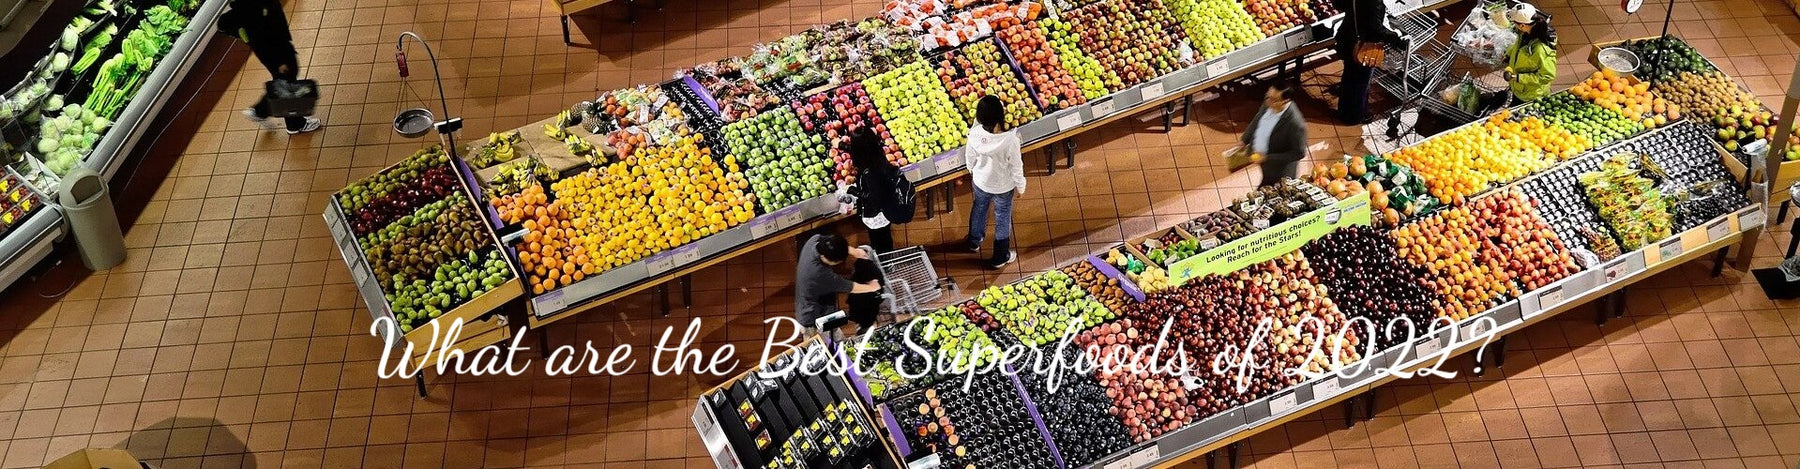 What are the Best Superfoods of 2022?